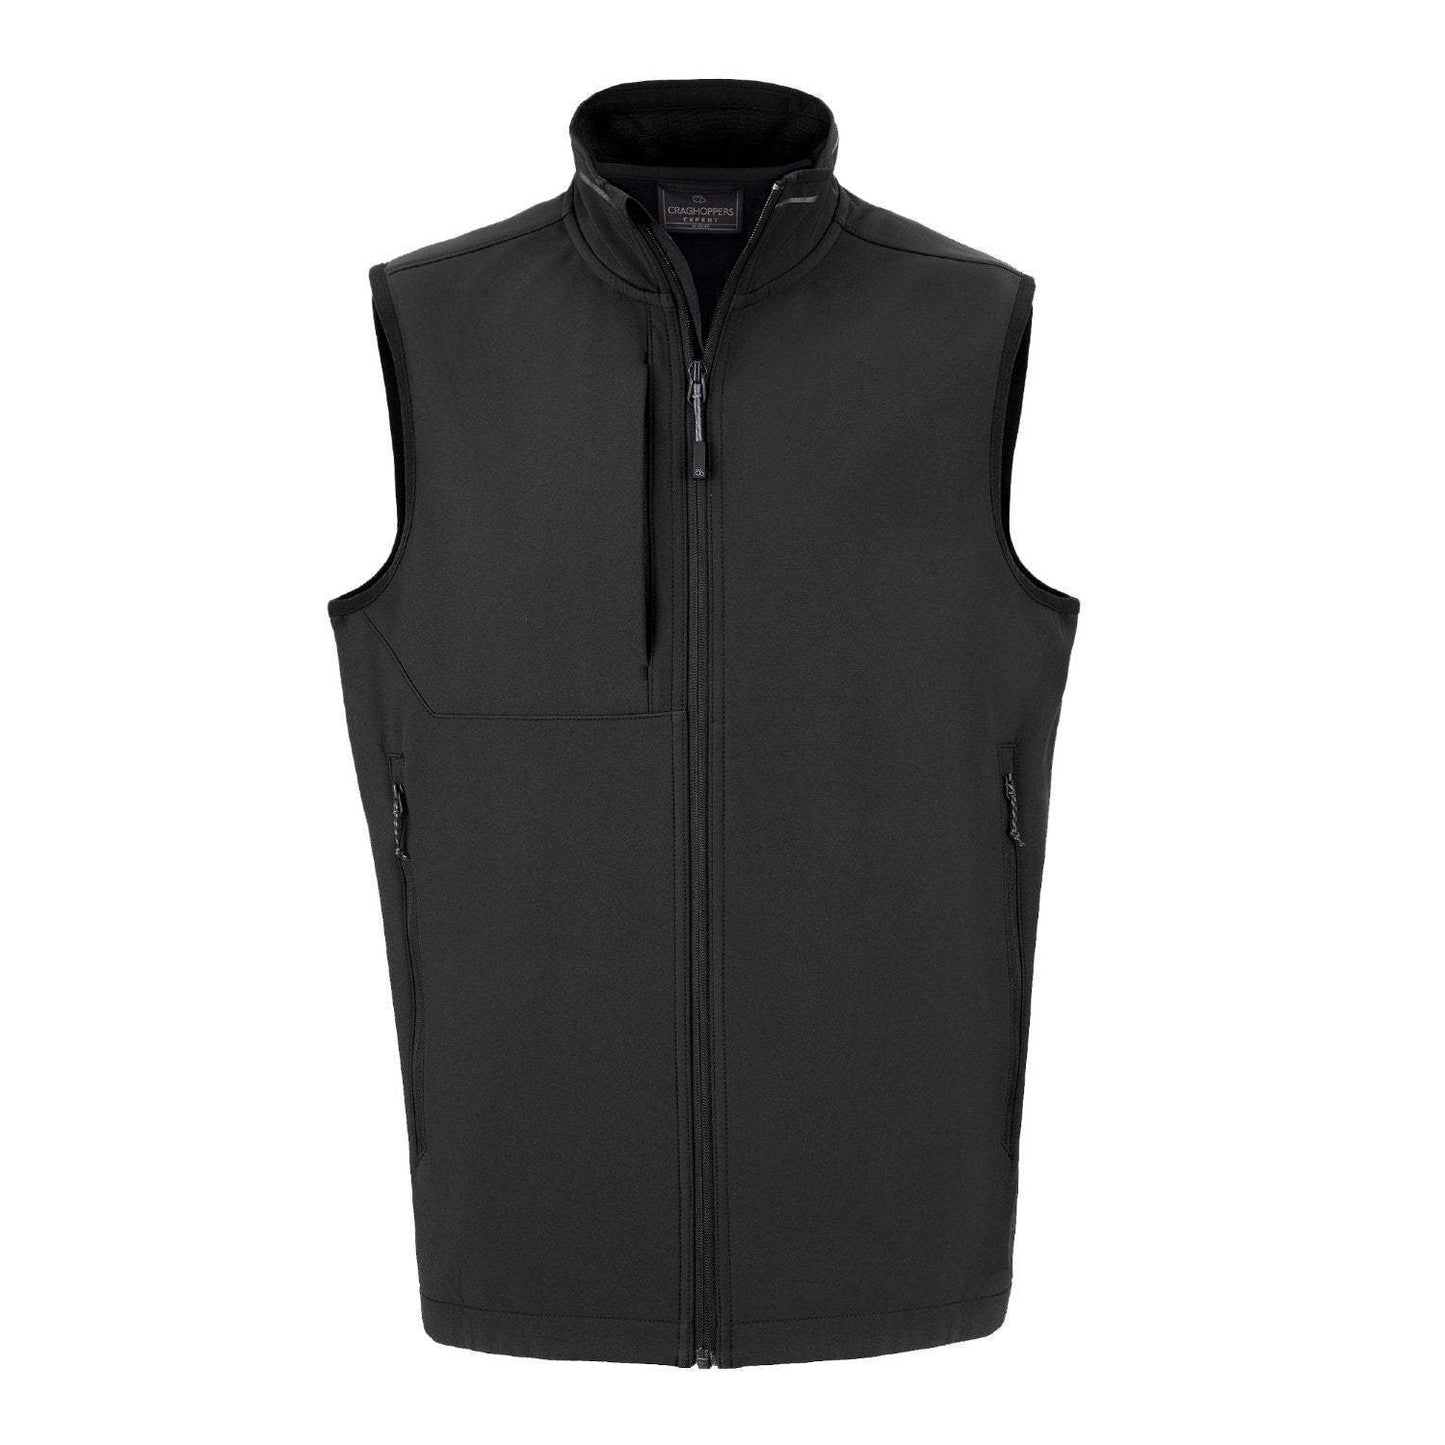 Unisex Expert Basecamp Softshell Vest by Craghoppers - The Luxury Promotional Gifts Company Limited